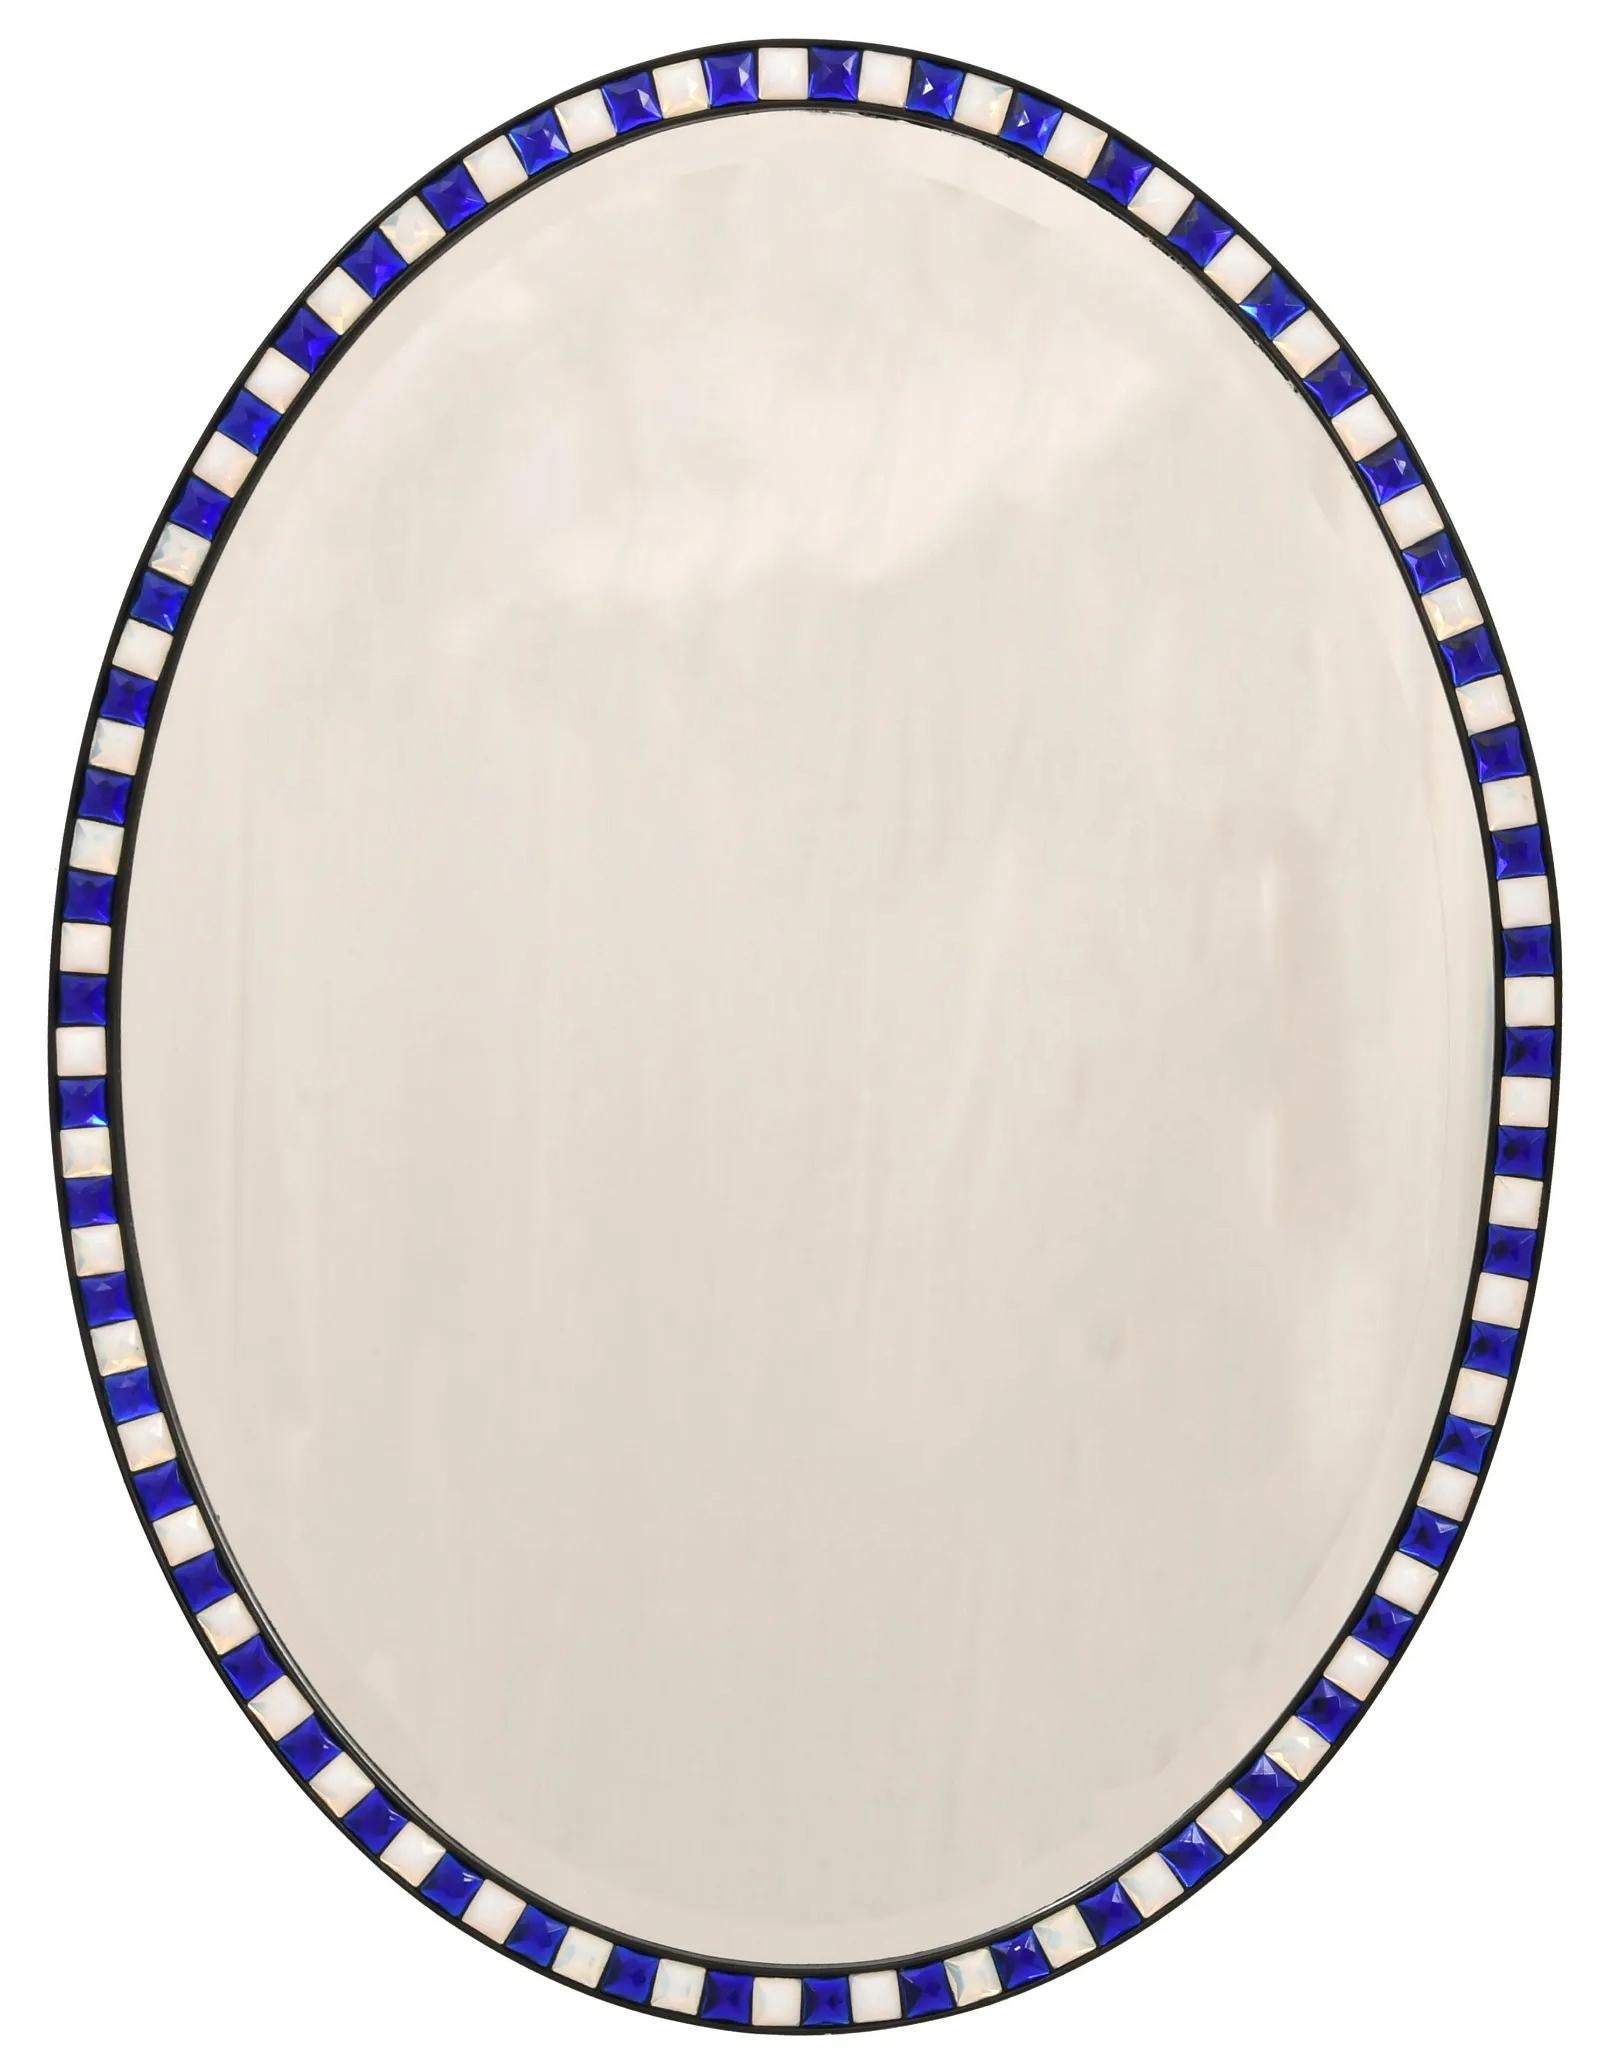 A 20th century Oval Mirror having bordered alternating blue and white glass panels with applied gilding in the traditional 18th century manner. Circa 1920s.